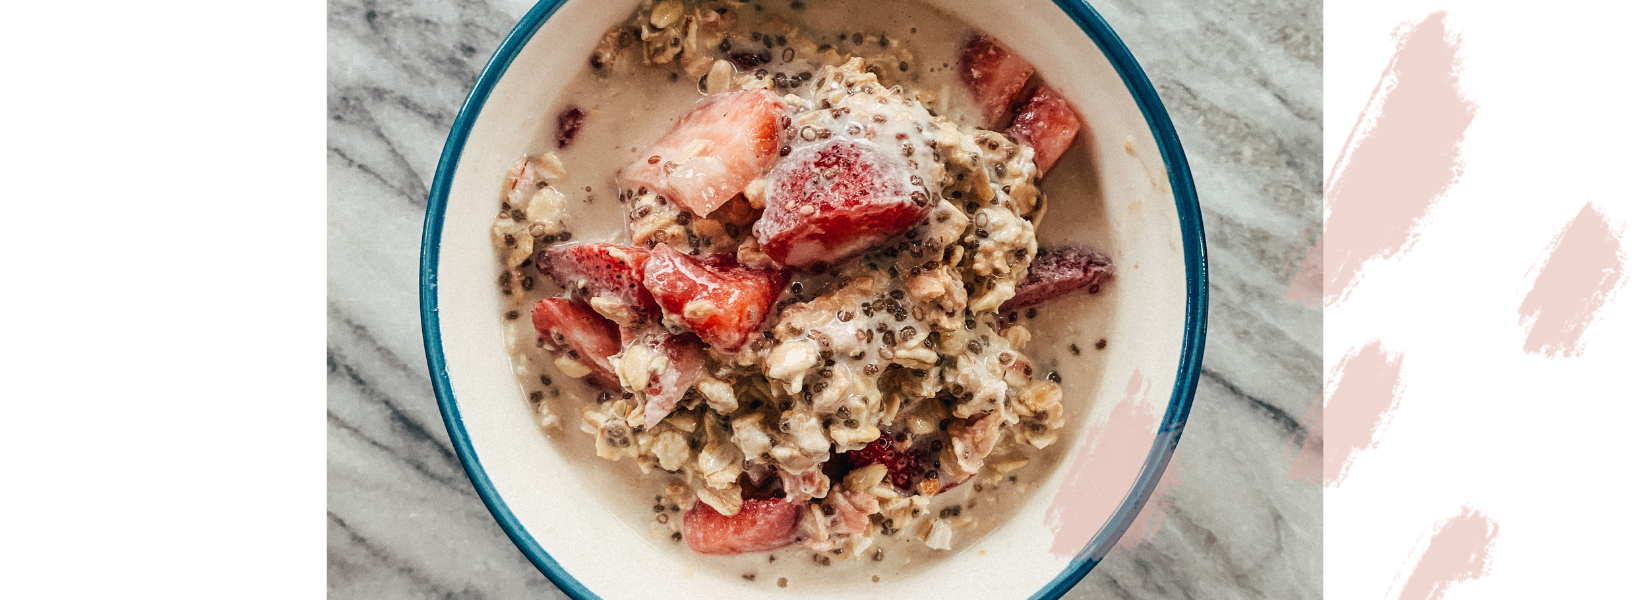 Easy Overnight Oats Recipe You Can Memorize